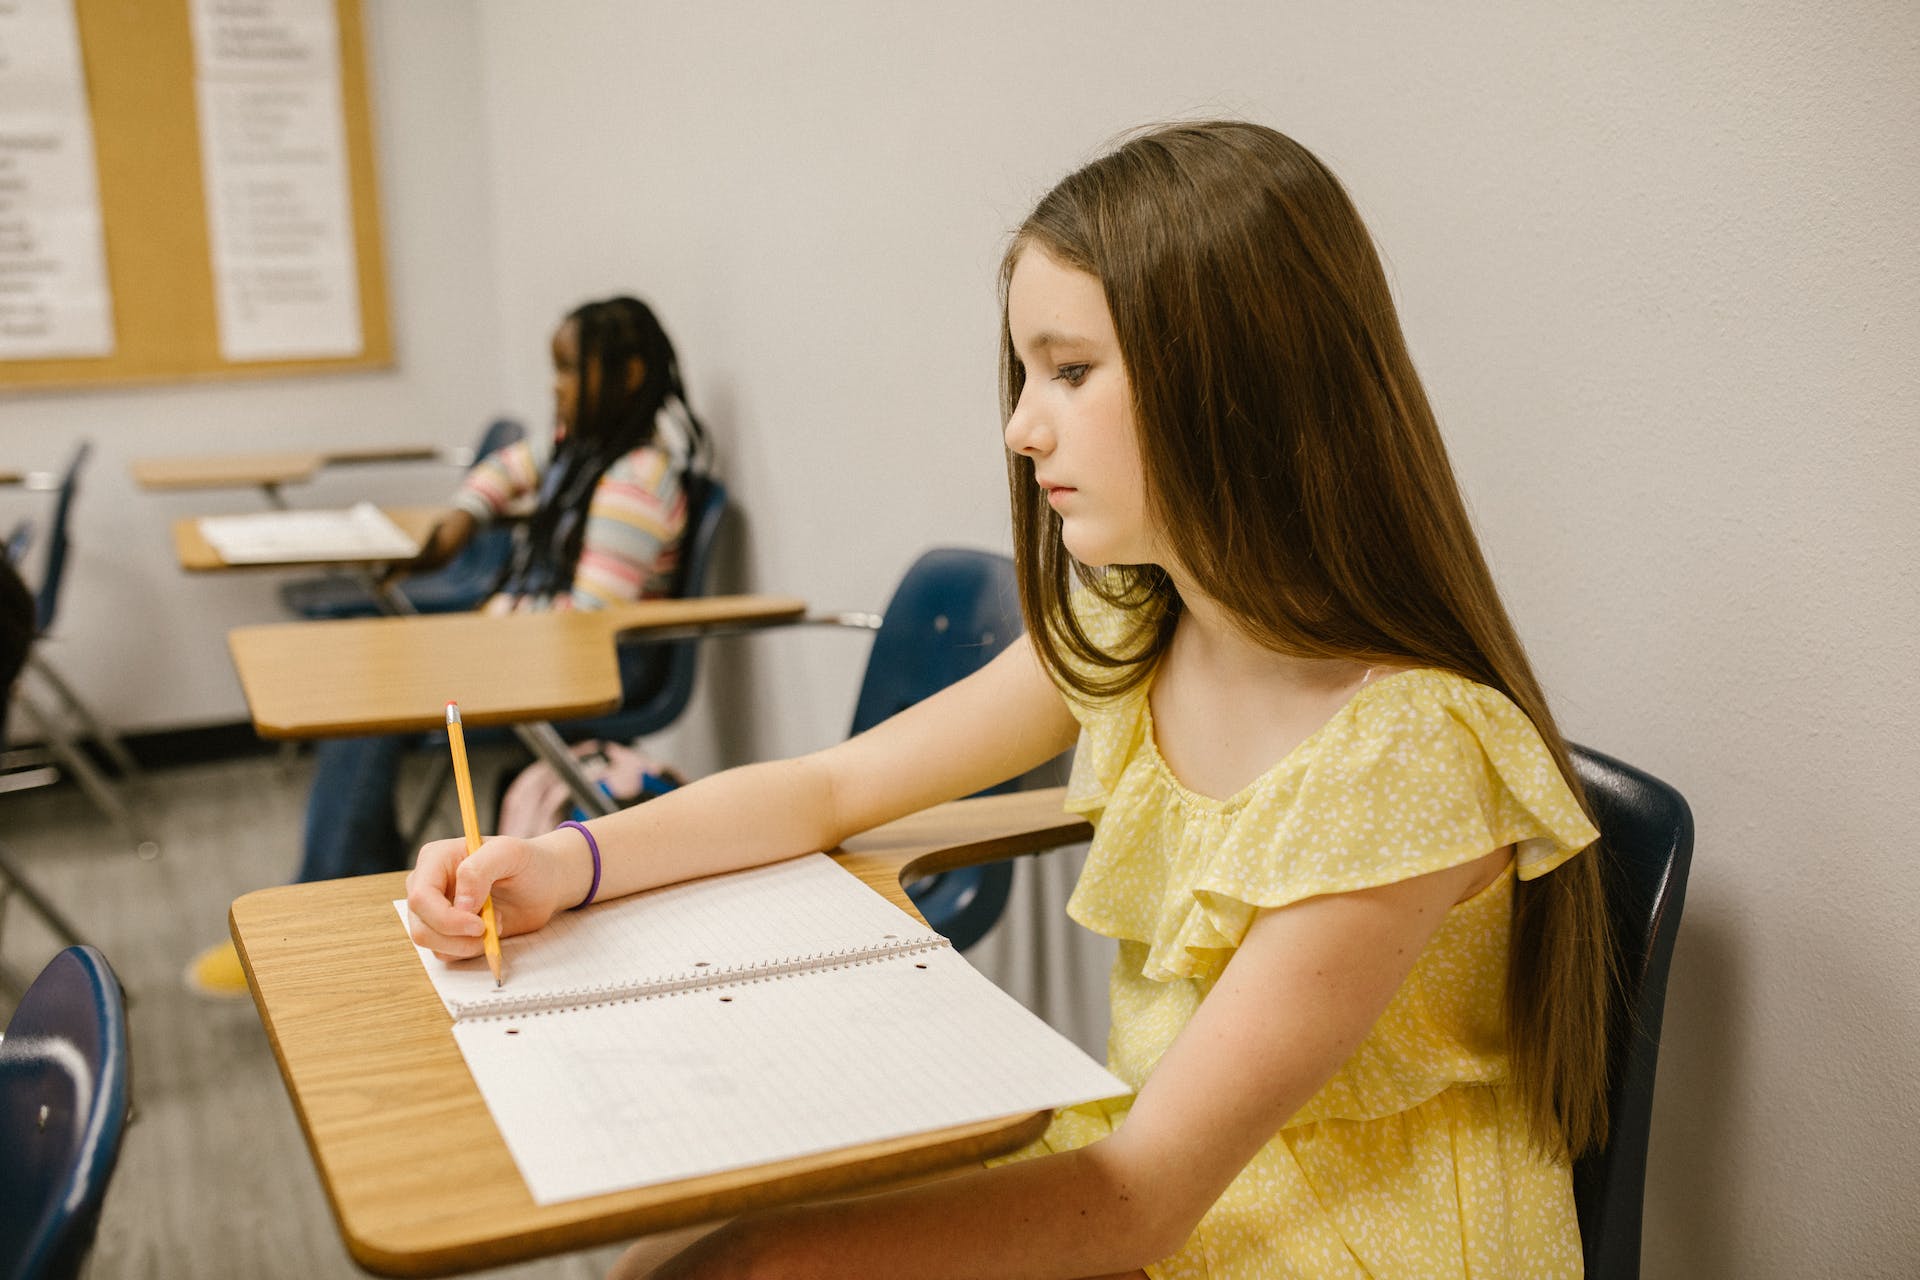 A lonely young girl sitting in a classroom | Source: Pexels